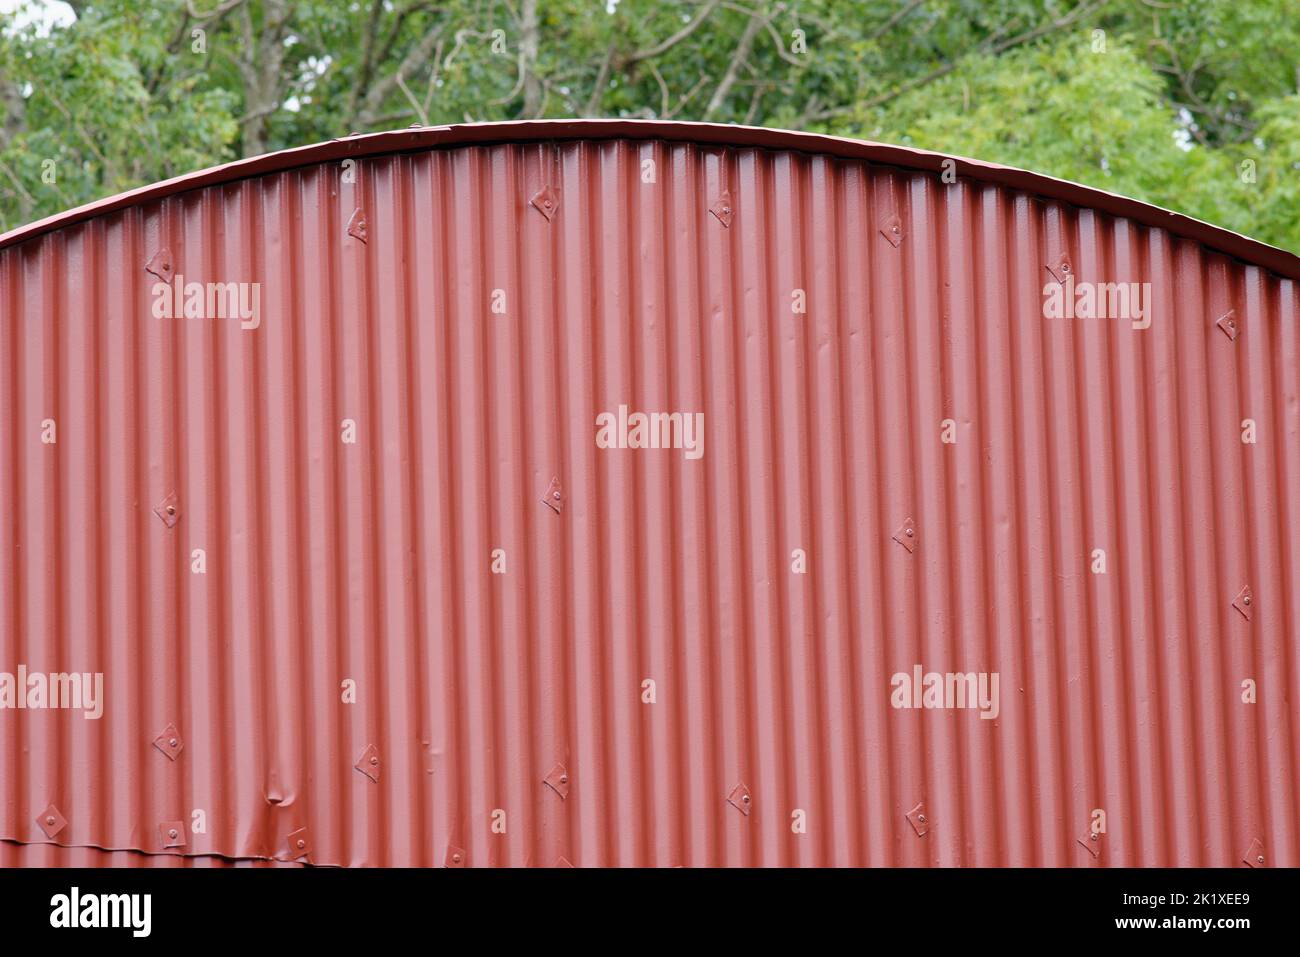 A maroon painted surface of an agricultural barn. Suitable as a background or as an element. Stock Photo